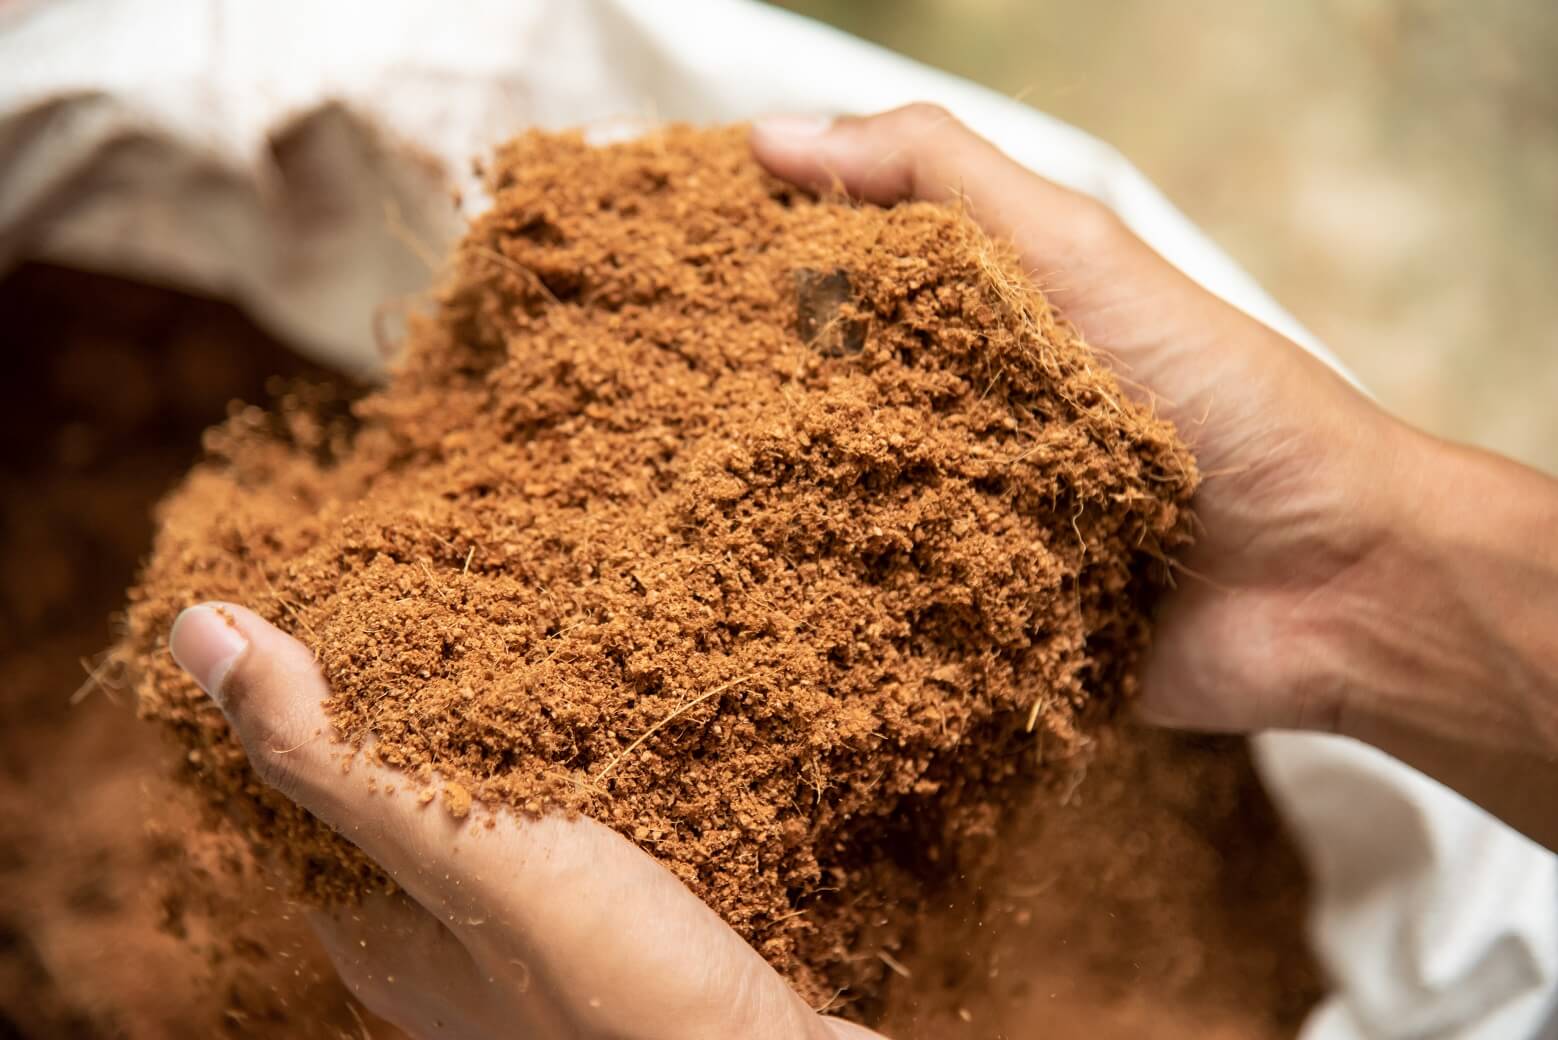 What Is Peat Moss, Its Uses, And Its Alternatives?